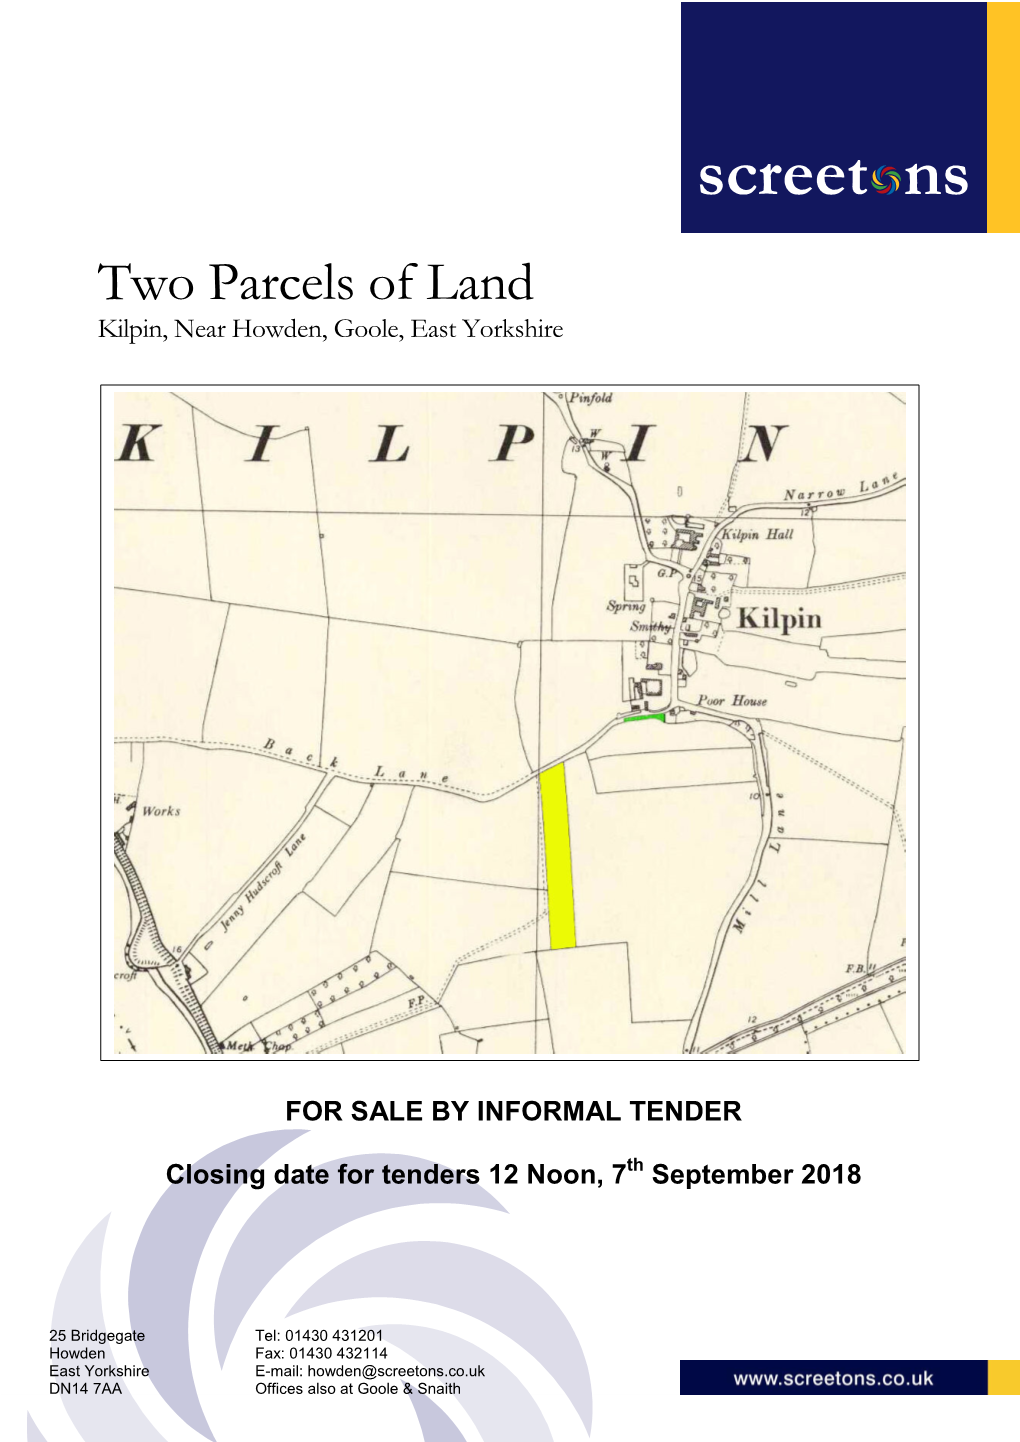 Two Parcels of Land Kilpin, Near Howden, Goole, East Yorkshire